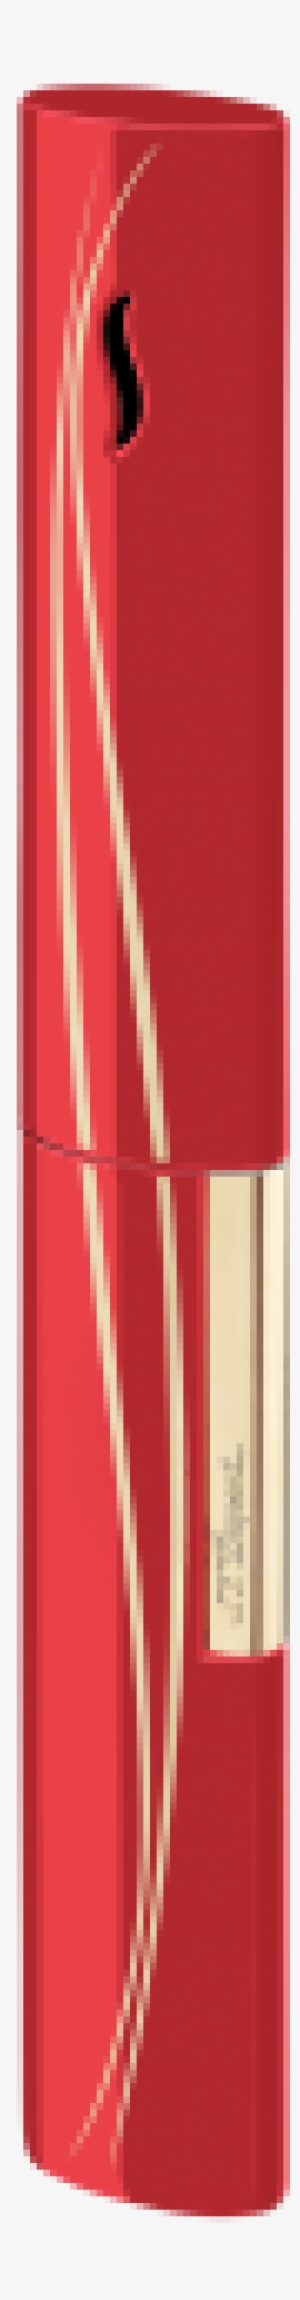 Candle Lighter The Wand Red Waves-gold - S.t. Dupont The Wand Candle Lighter